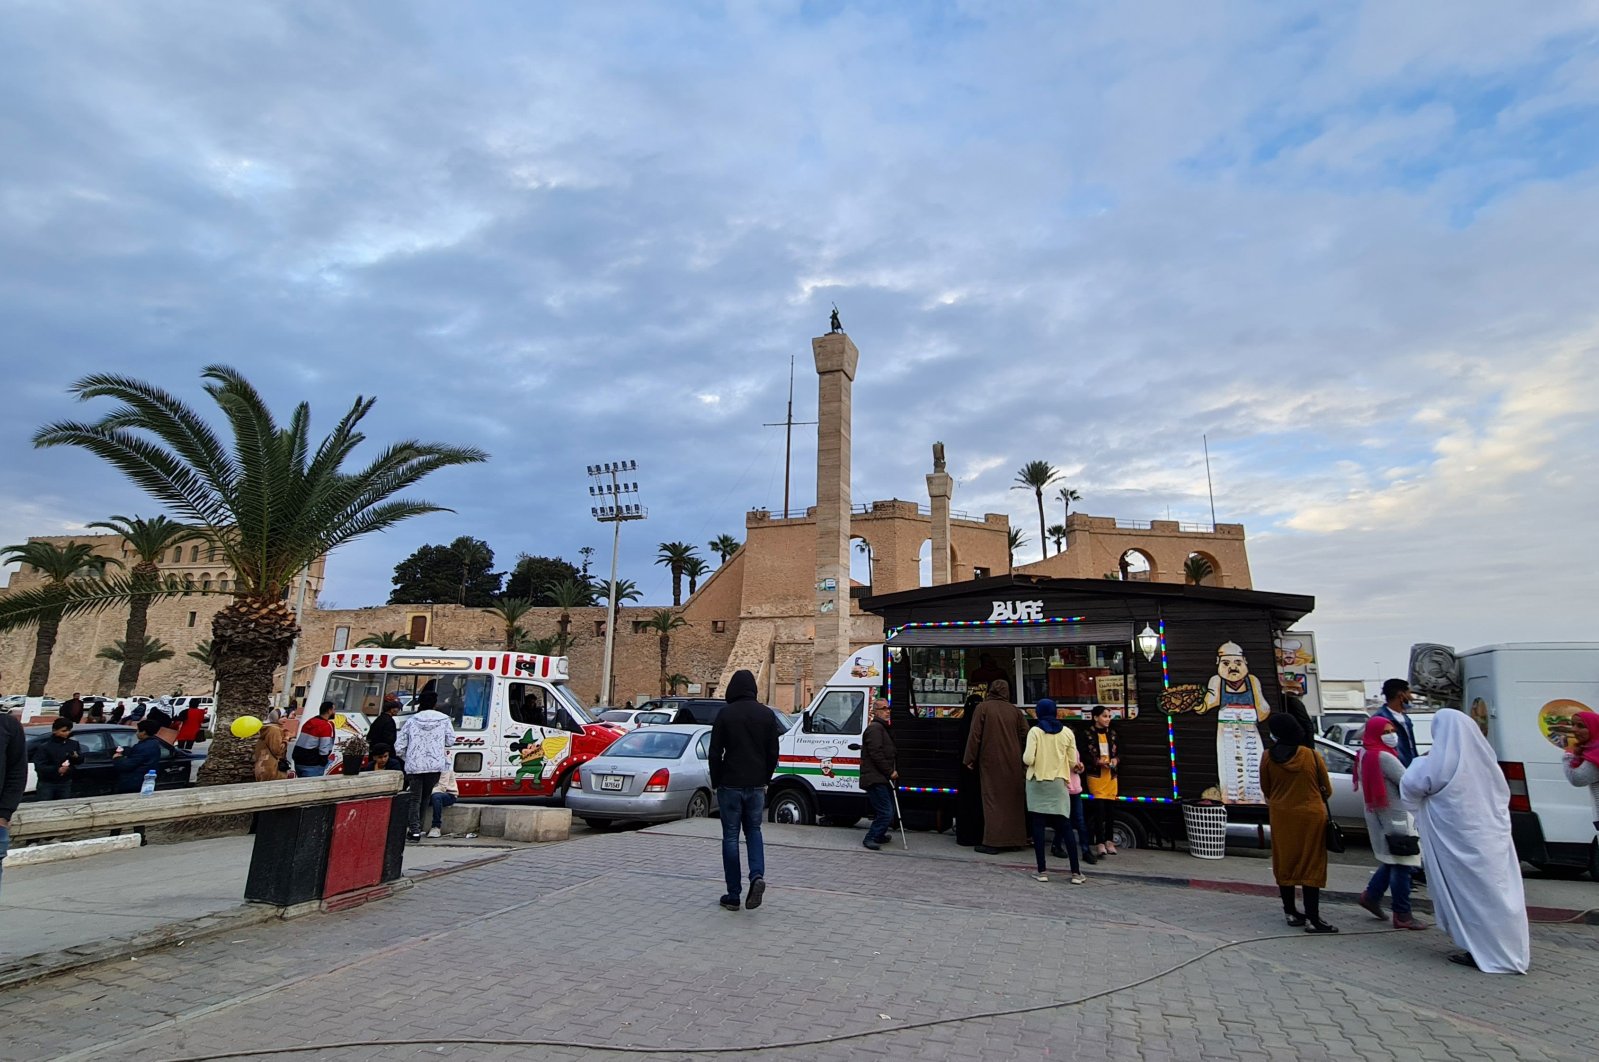 Libyans gather at Martyrs' Square in the capital Tripoli, Libya, Feb. 1, 2021. (AFP Photo)